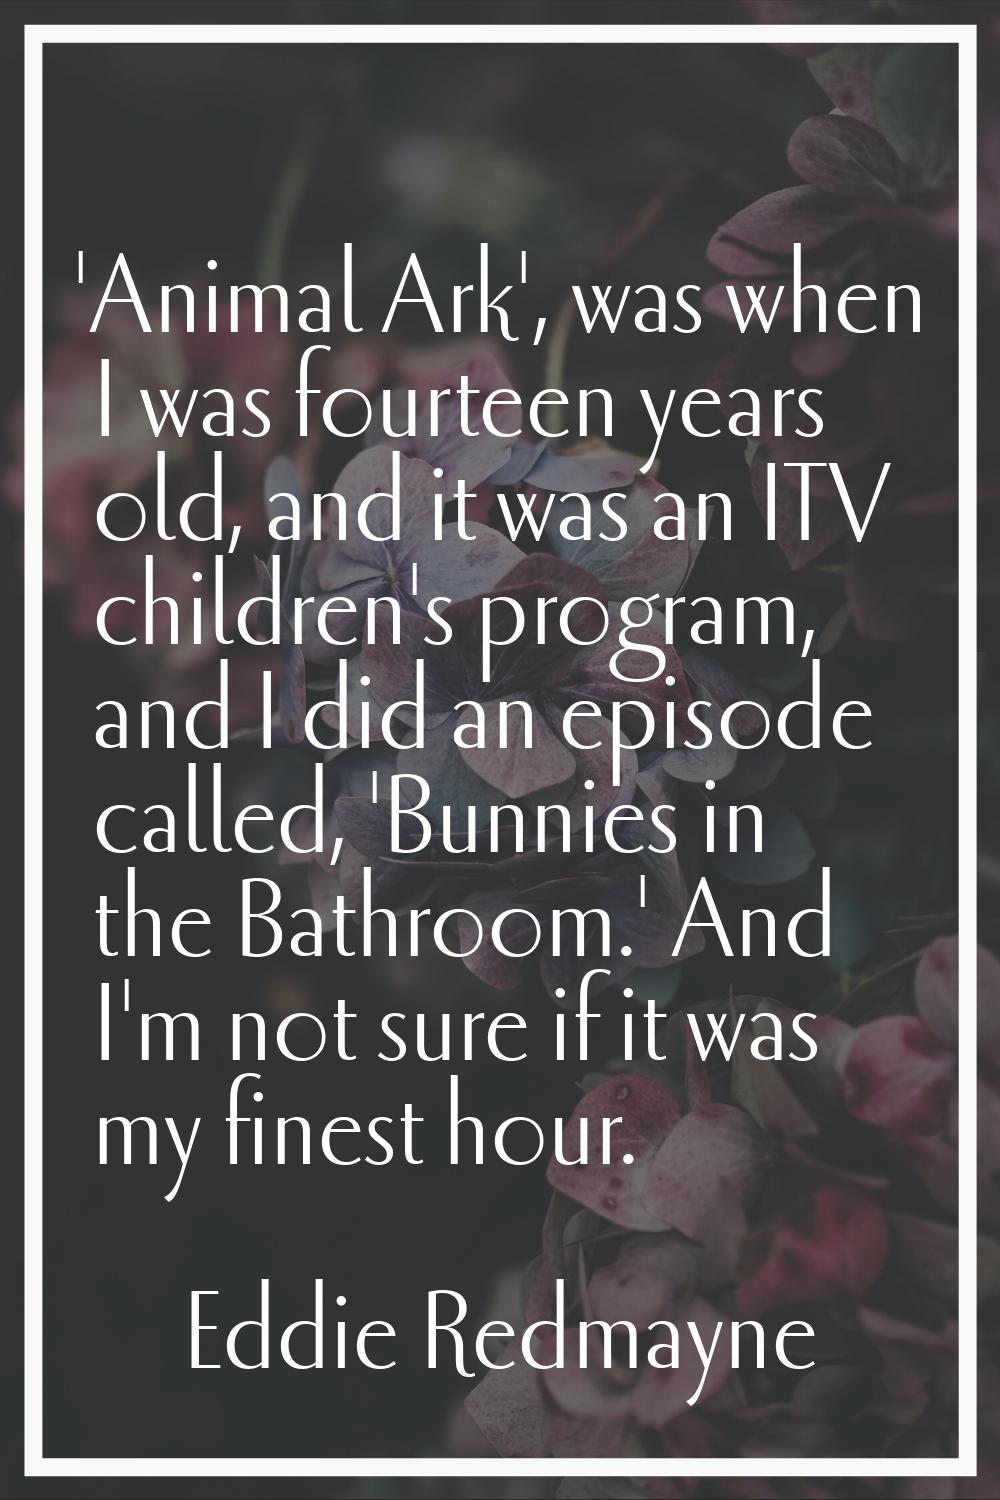 'Animal Ark', was when I was fourteen years old, and it was an ITV children's program, and I did an